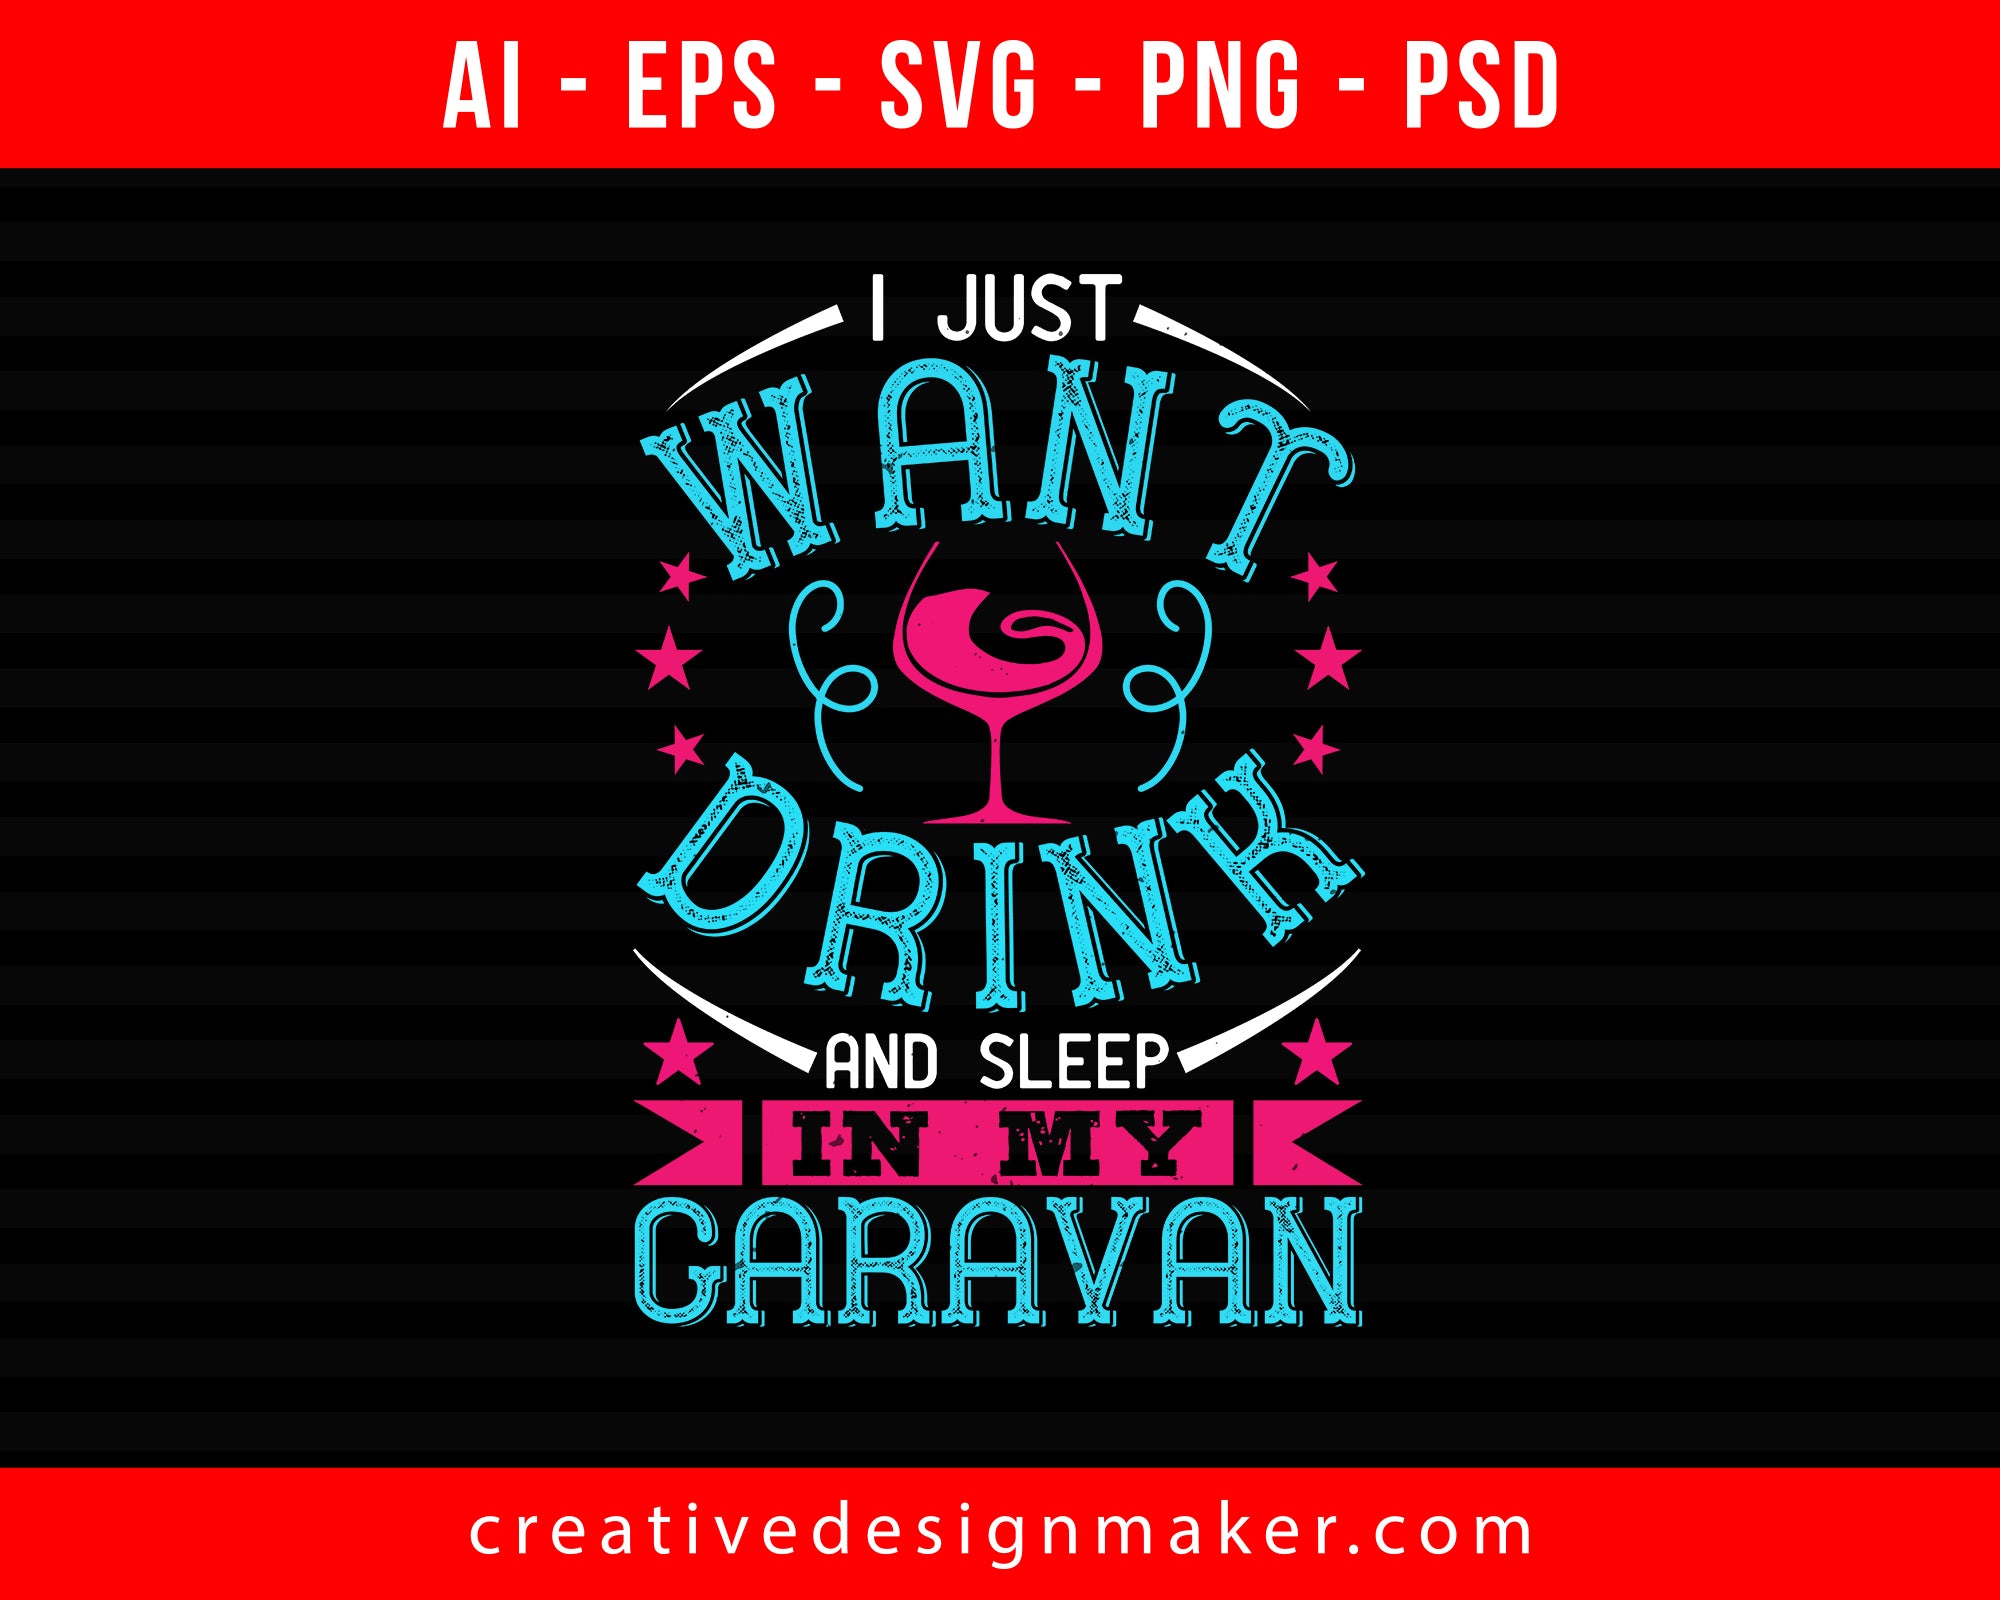 I just want drink Wine and sleep in my caravan Print Ready Editable T-Shirt SVG Design!